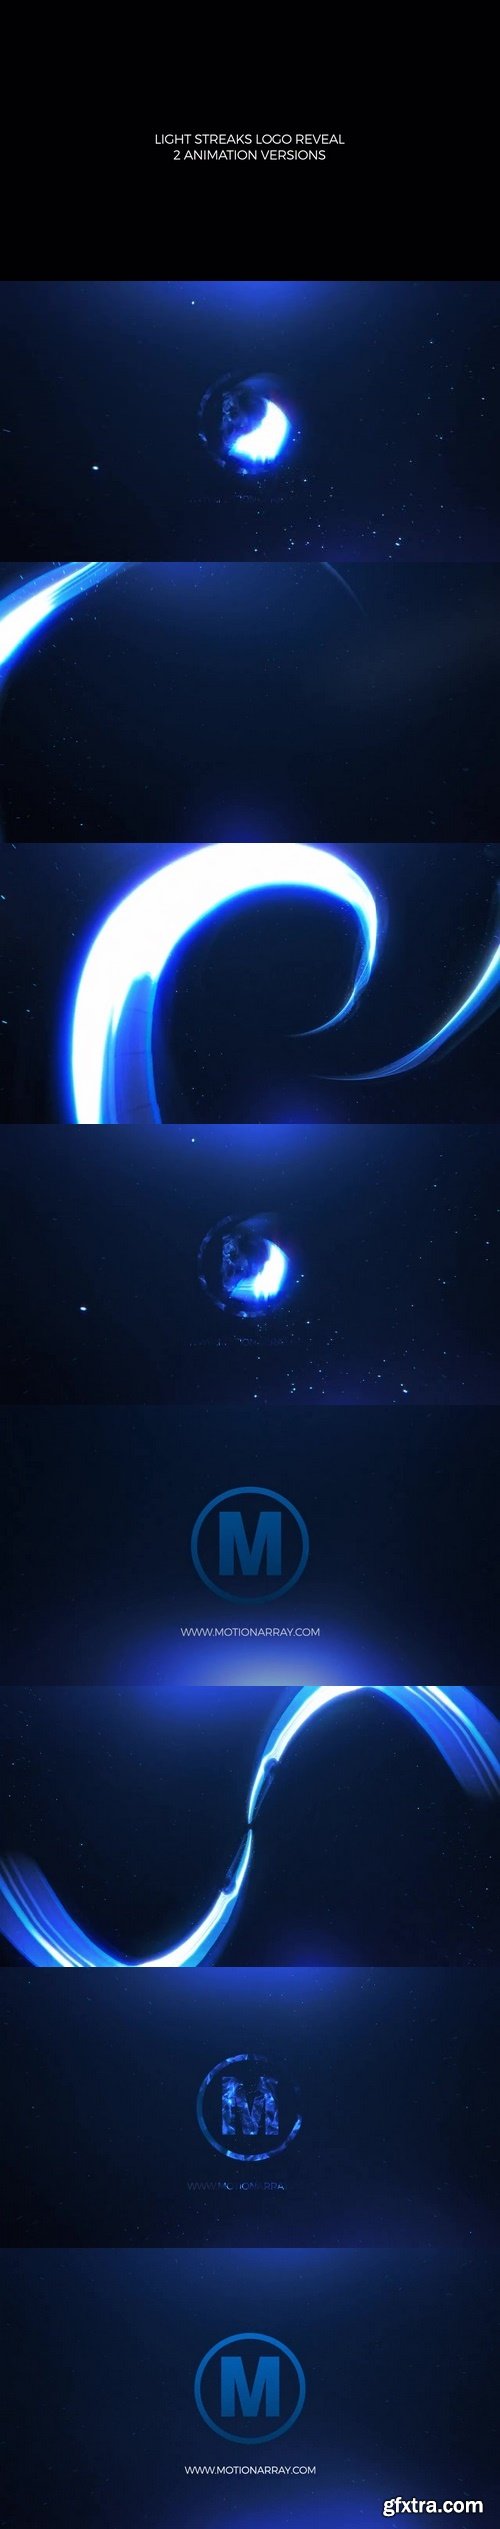 MA - Light Streaks Logo Reveal After Effects Templates 58091